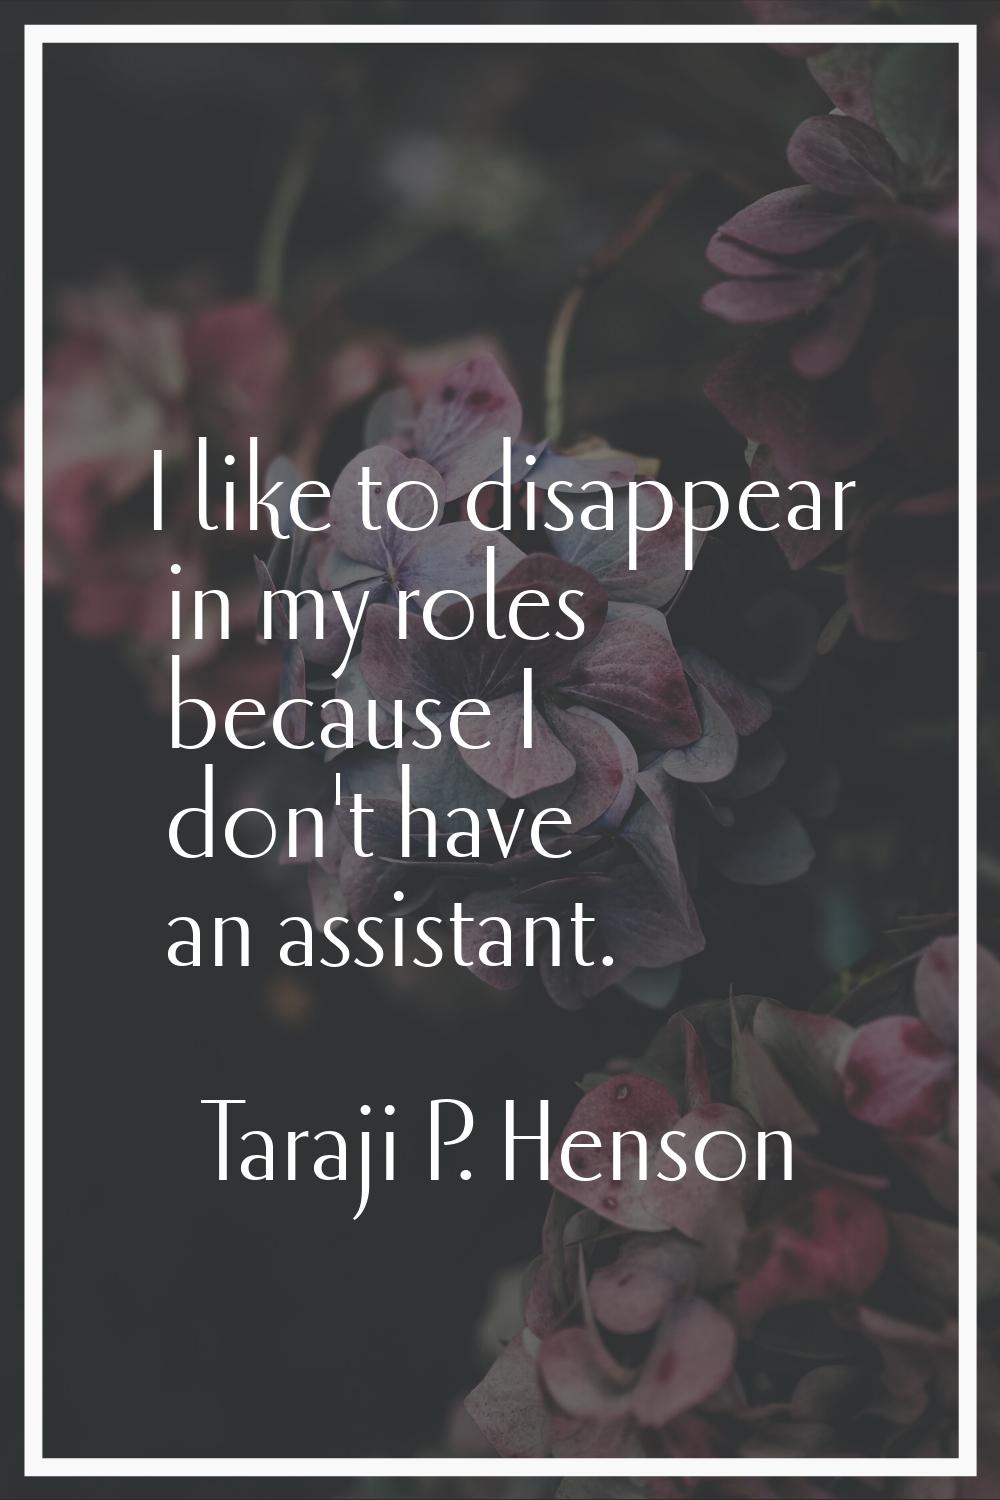 I like to disappear in my roles because I don't have an assistant.